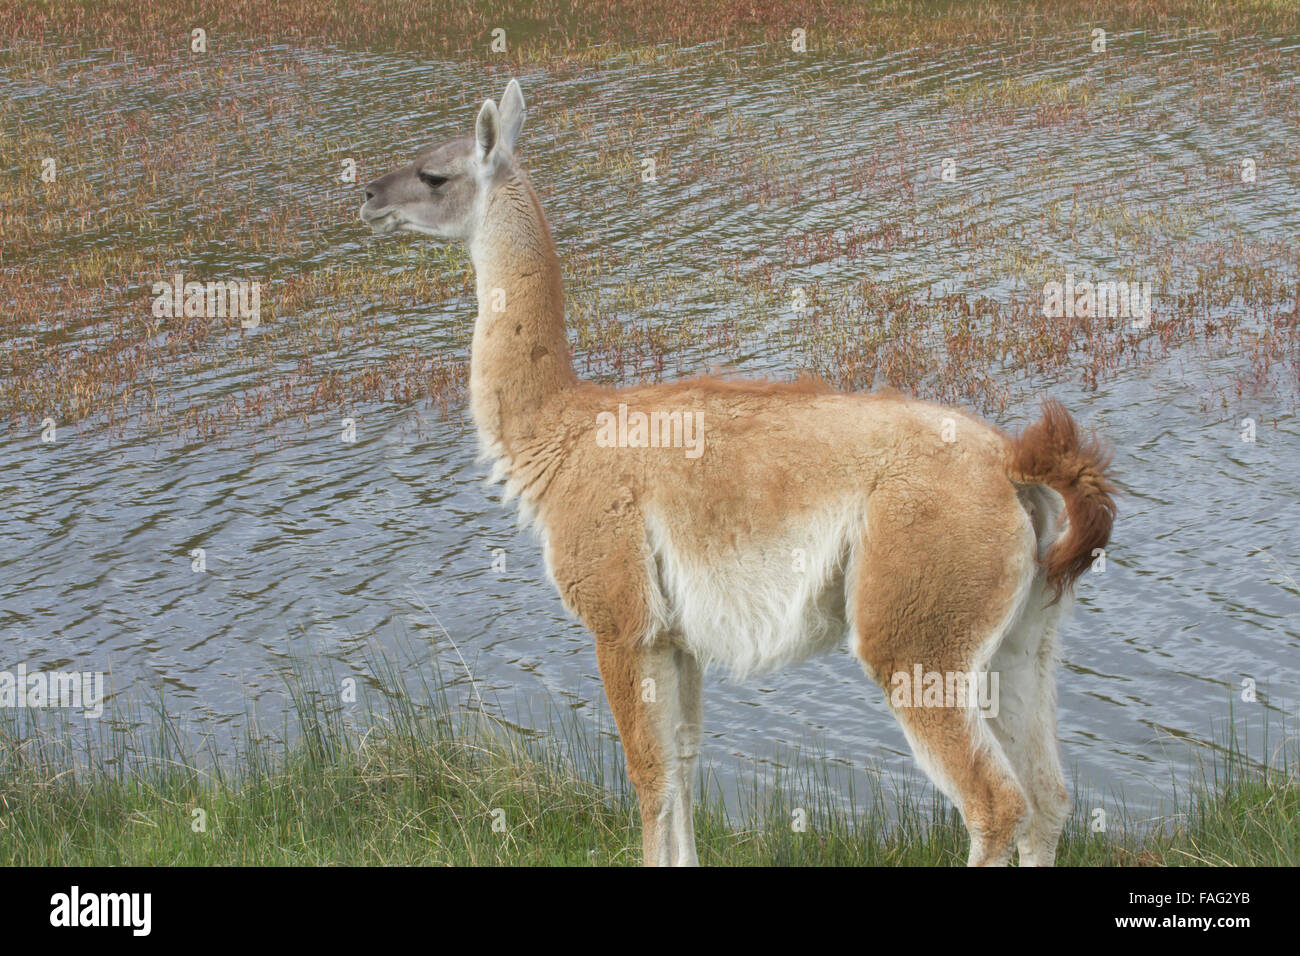 Profile of adult guanaco standing by waters edge in Chilean steppe with perked ears. Stock Photo